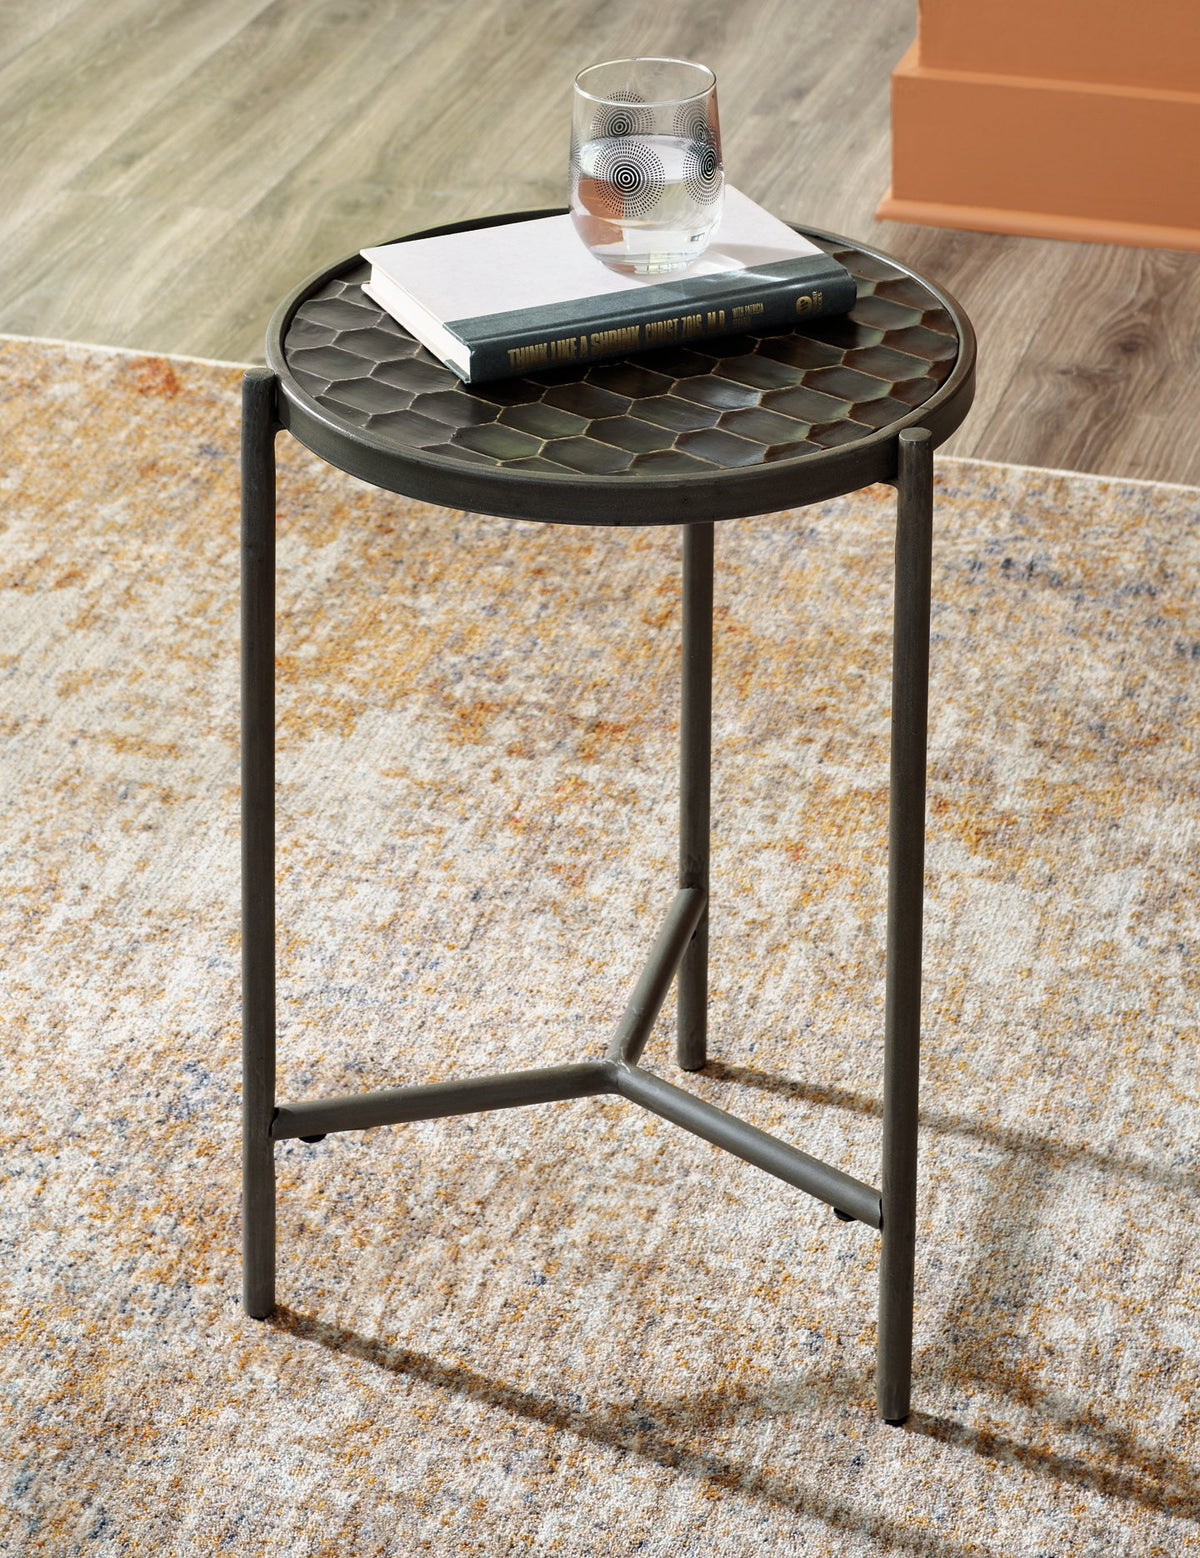 Doraley Chairside End Table - Half Price Furniture